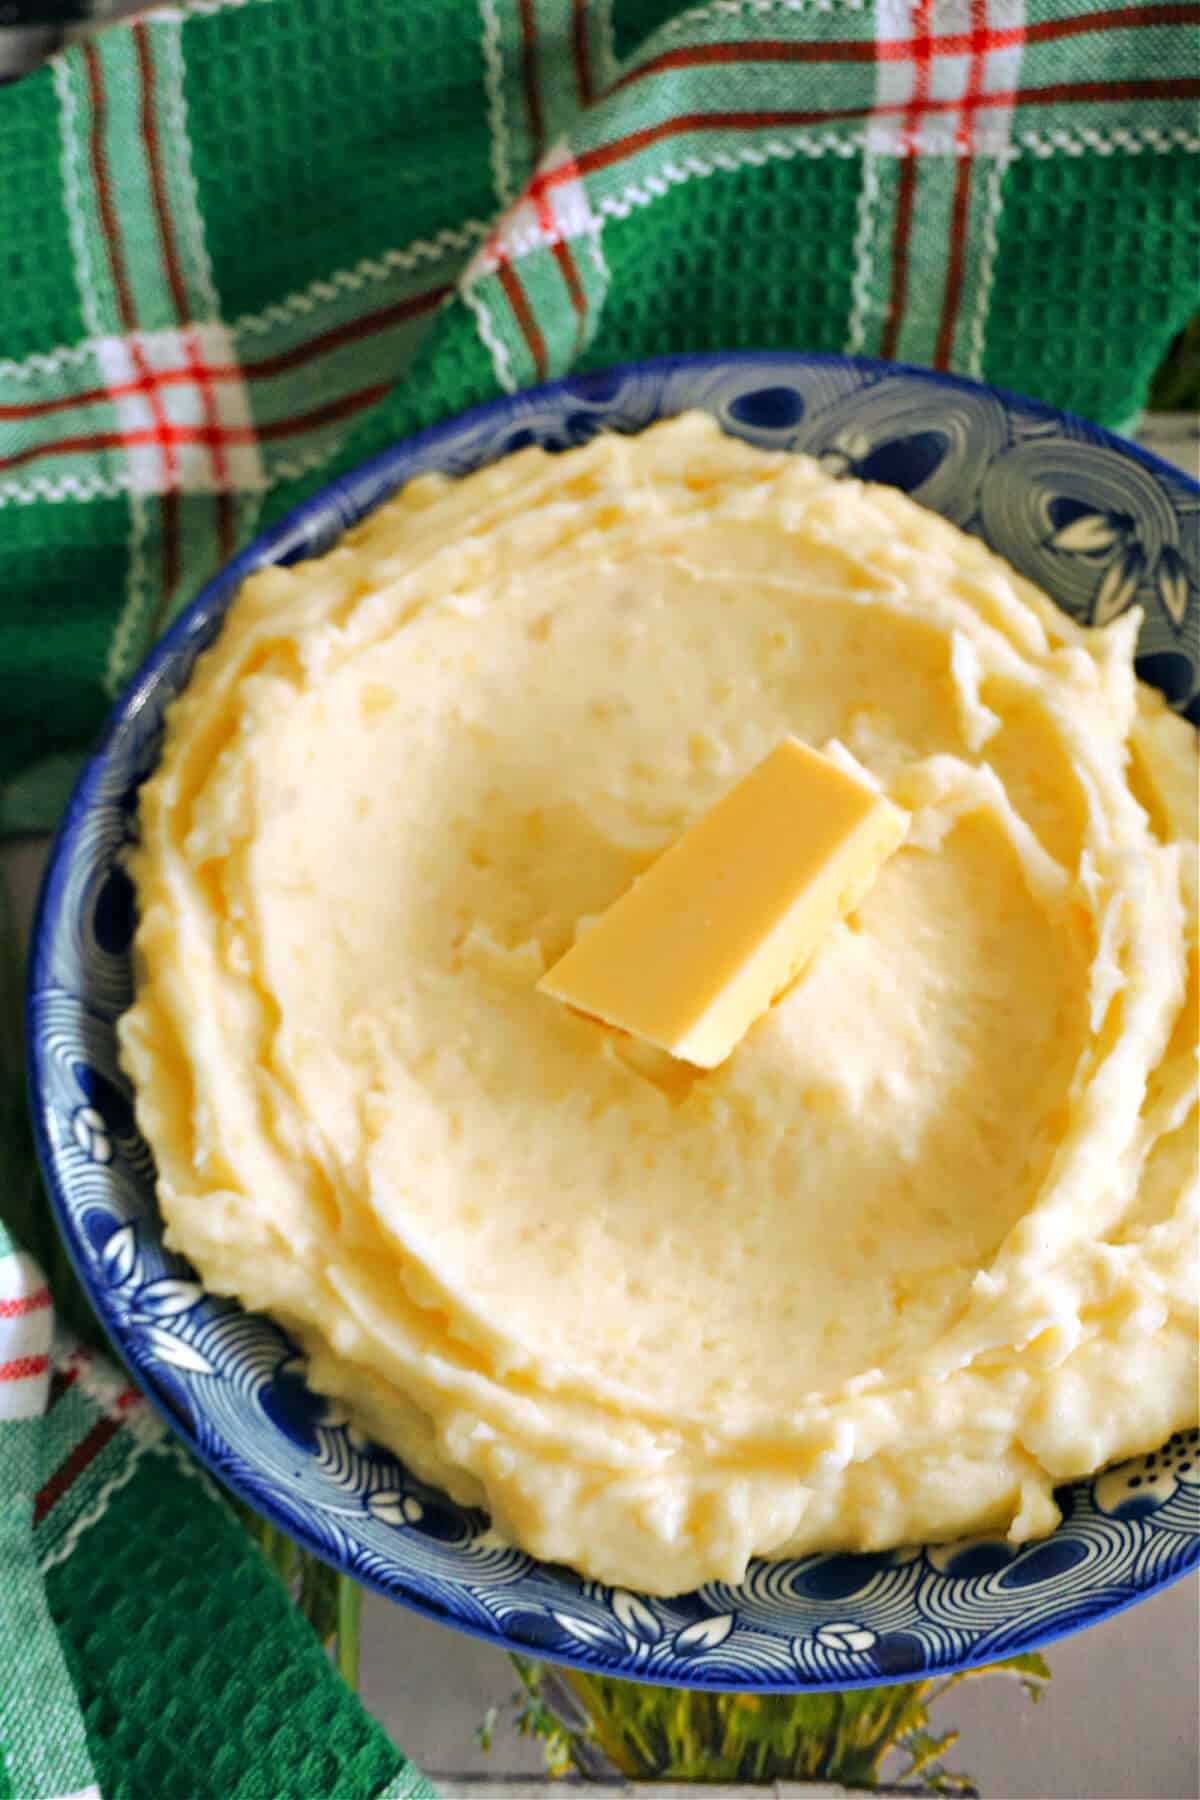 A plate with mashed potatoes and a cube of butter on top.